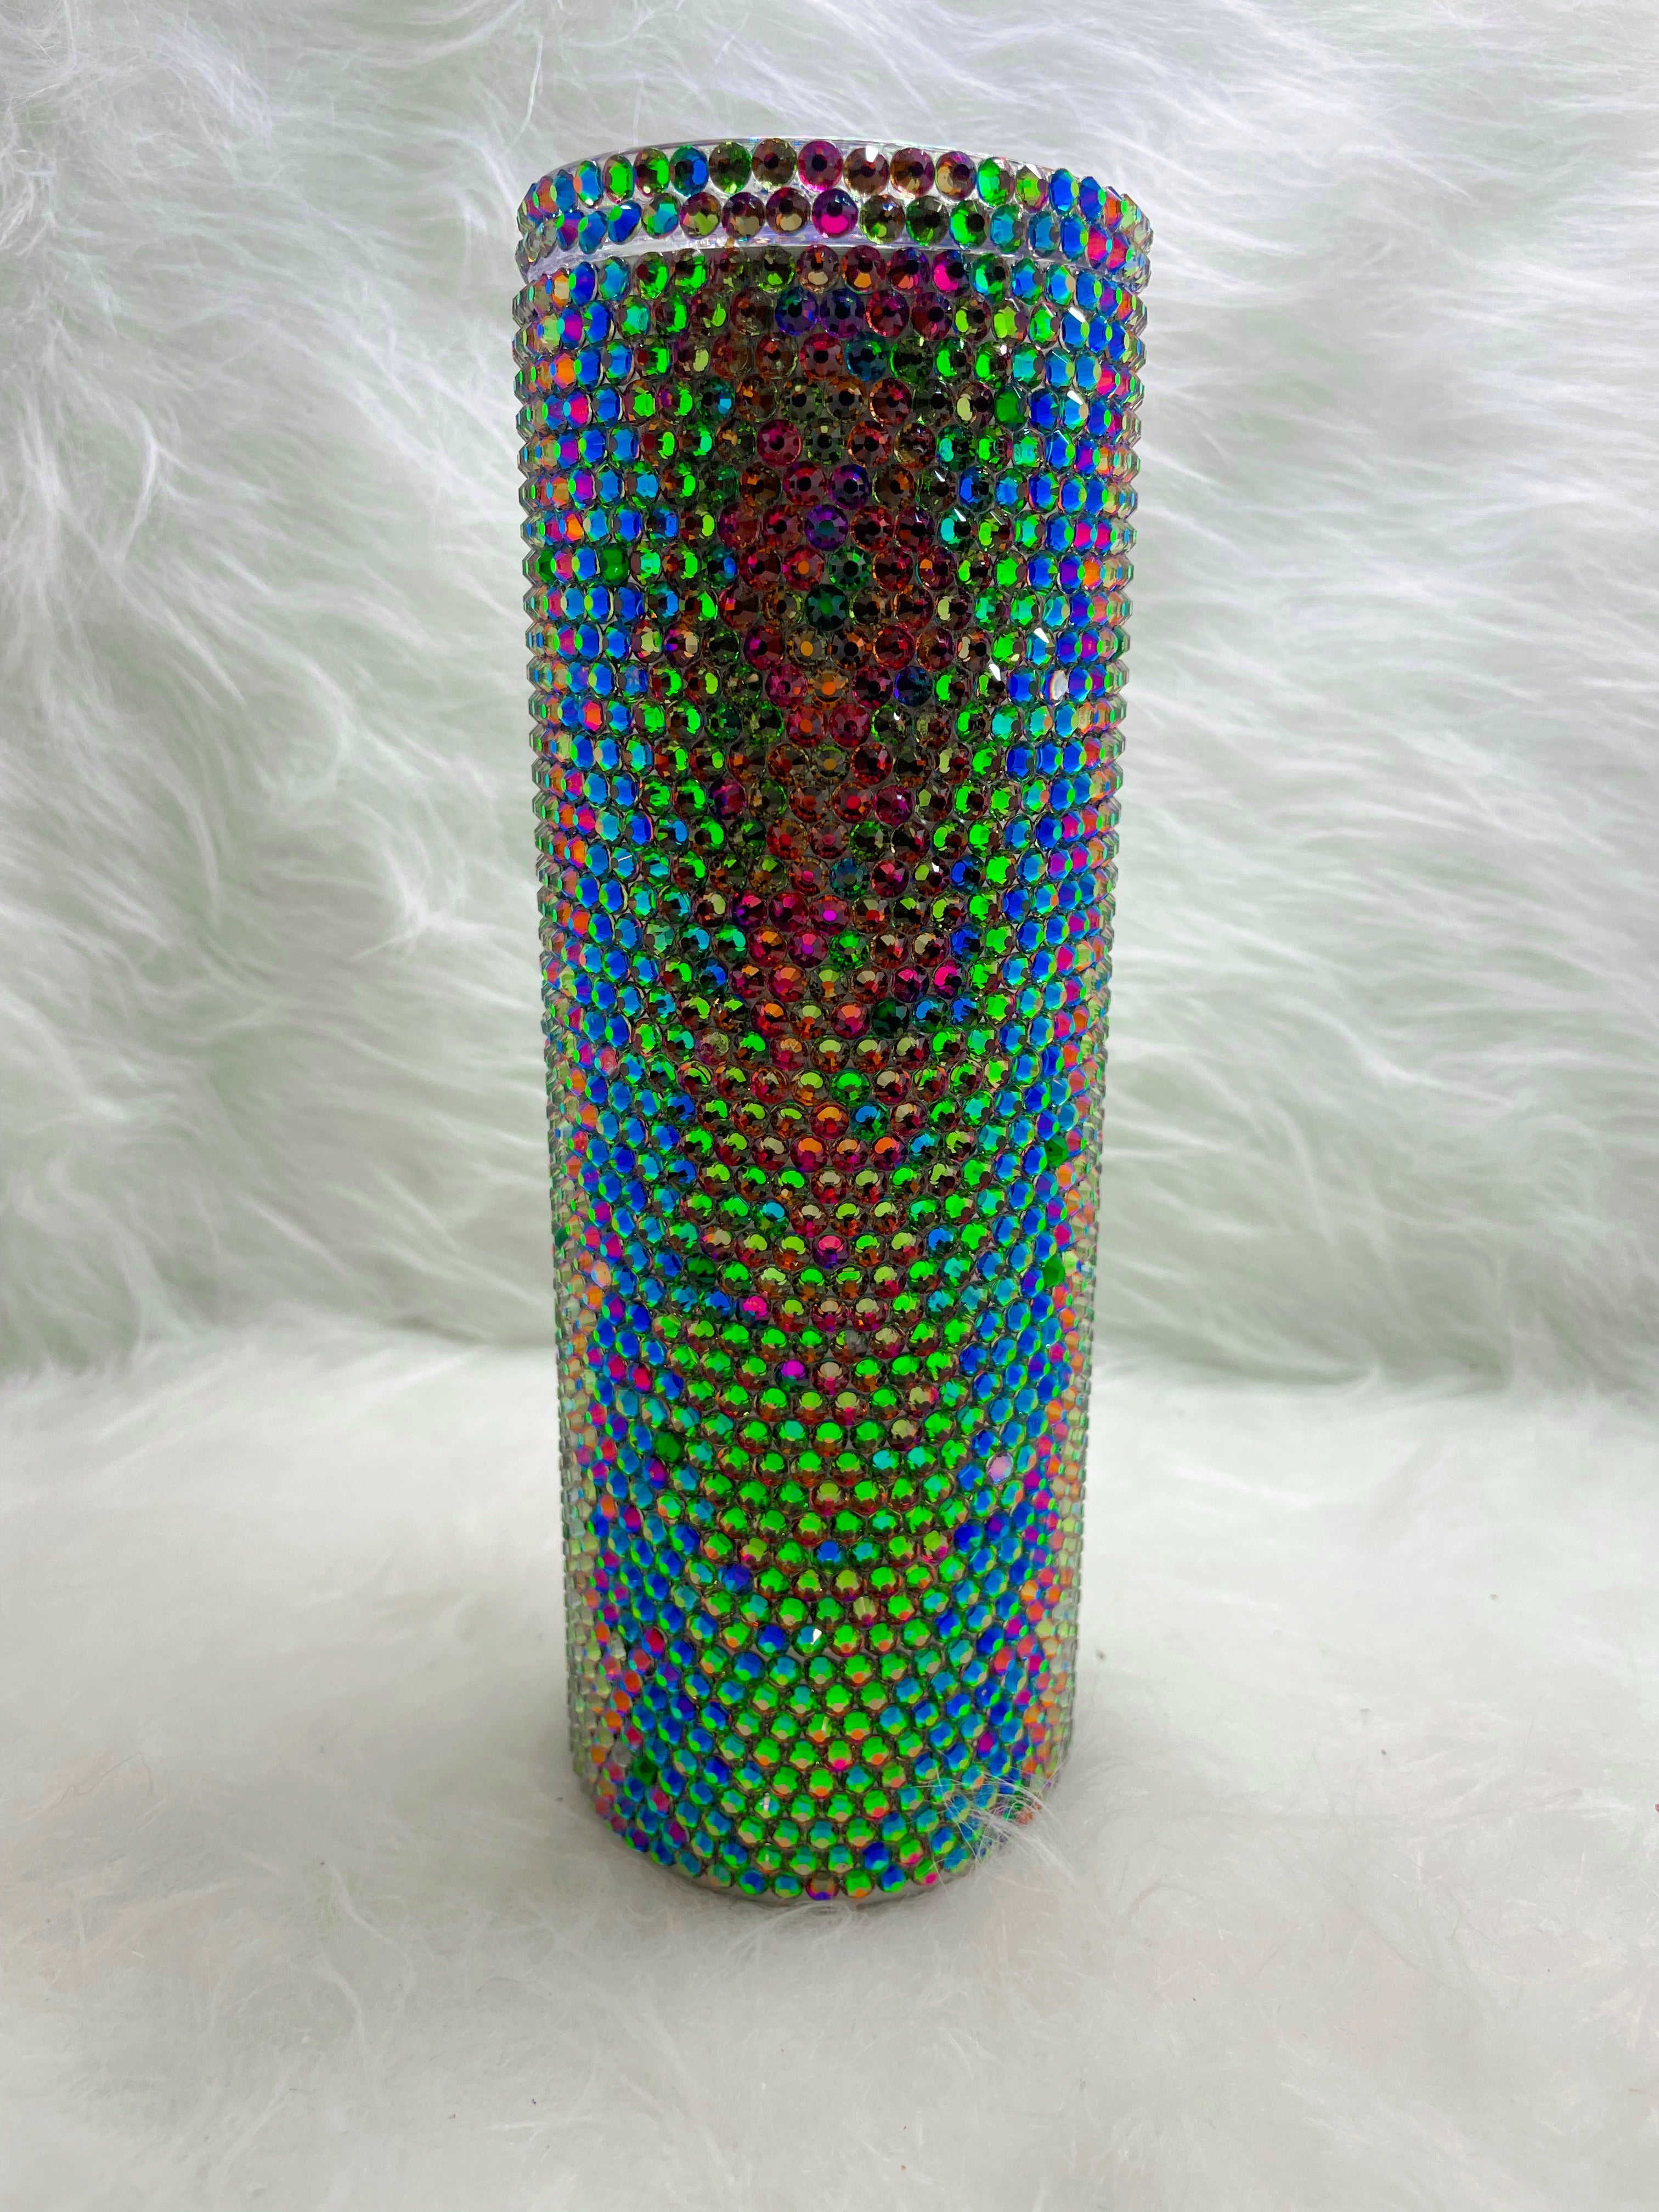 Design Your Own Large Tumbler – The Bling Sisters